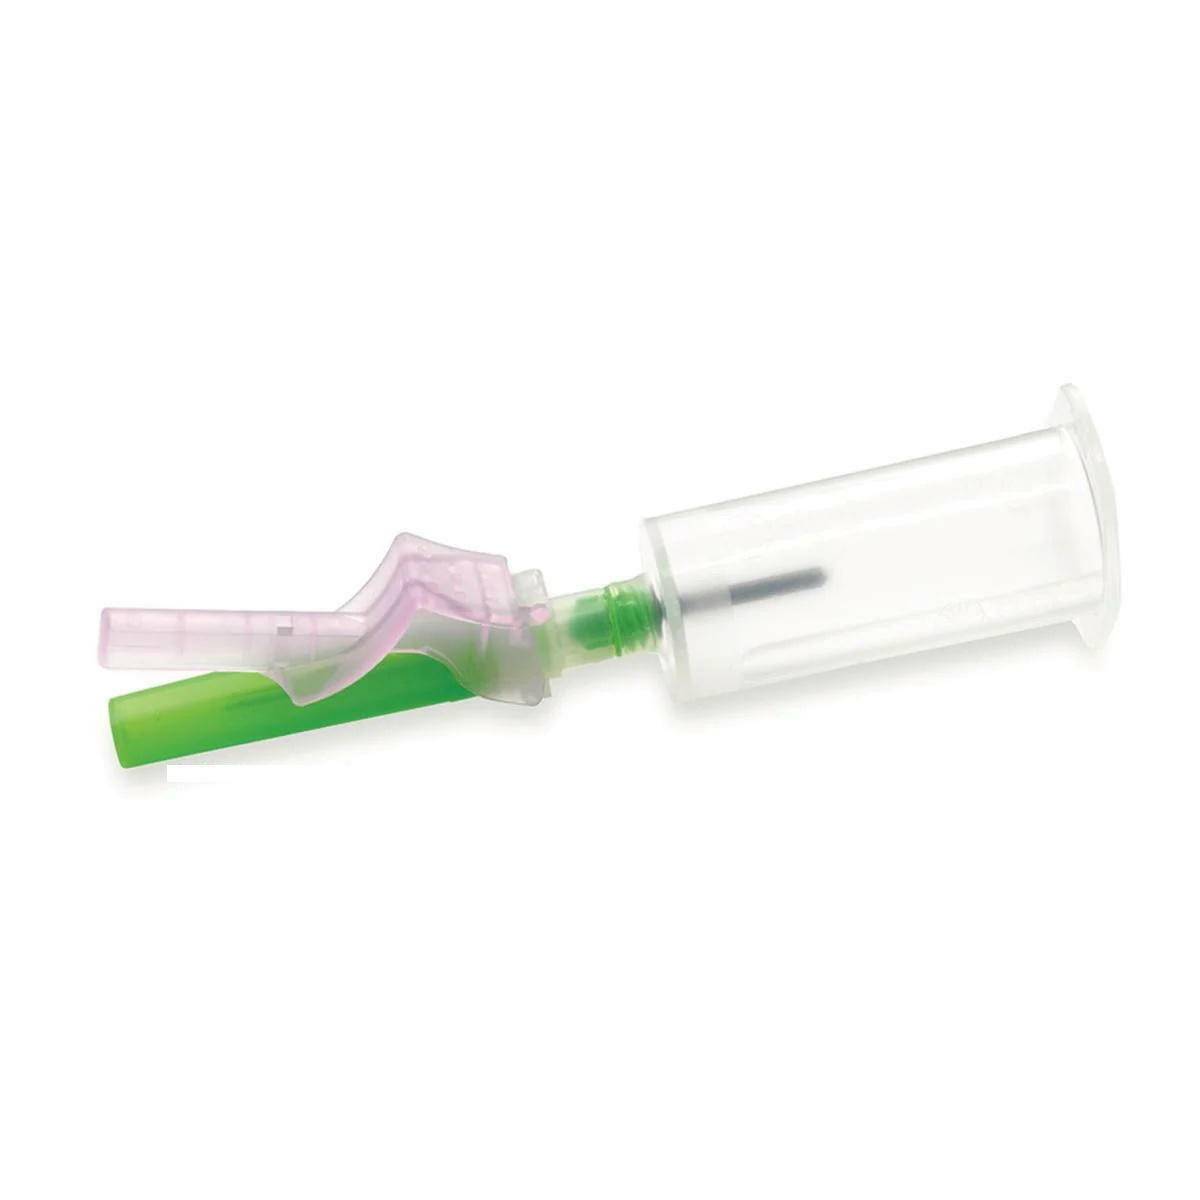 22g 1.25 inch BD Vacutainer Eclipse Blood Collection Needle with Preattached Holder